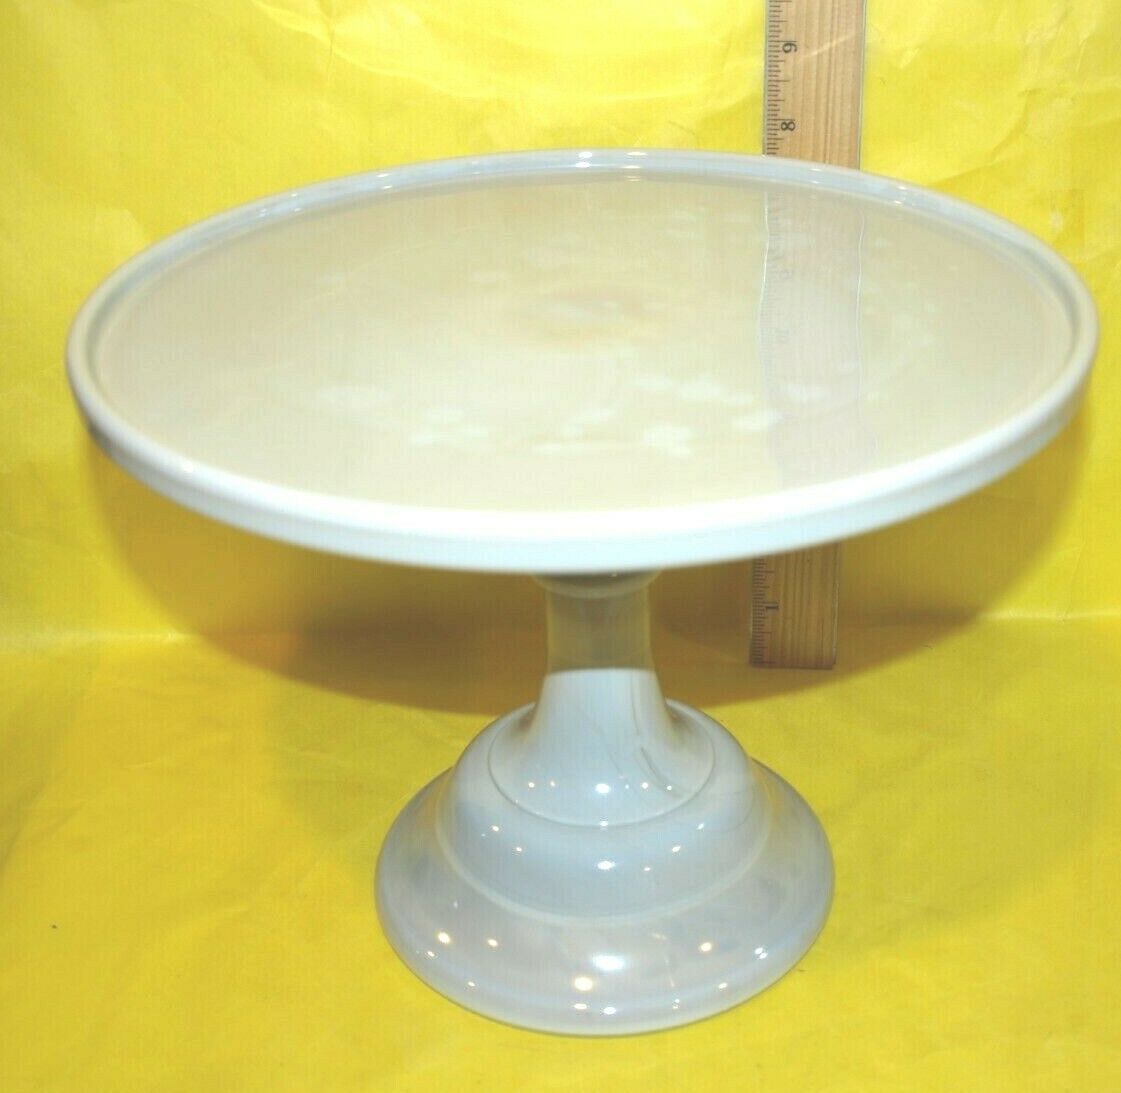 Mosser Glass 10" Gray Marble Pedestal Cake / Pastry Stand Plate, New Open Box